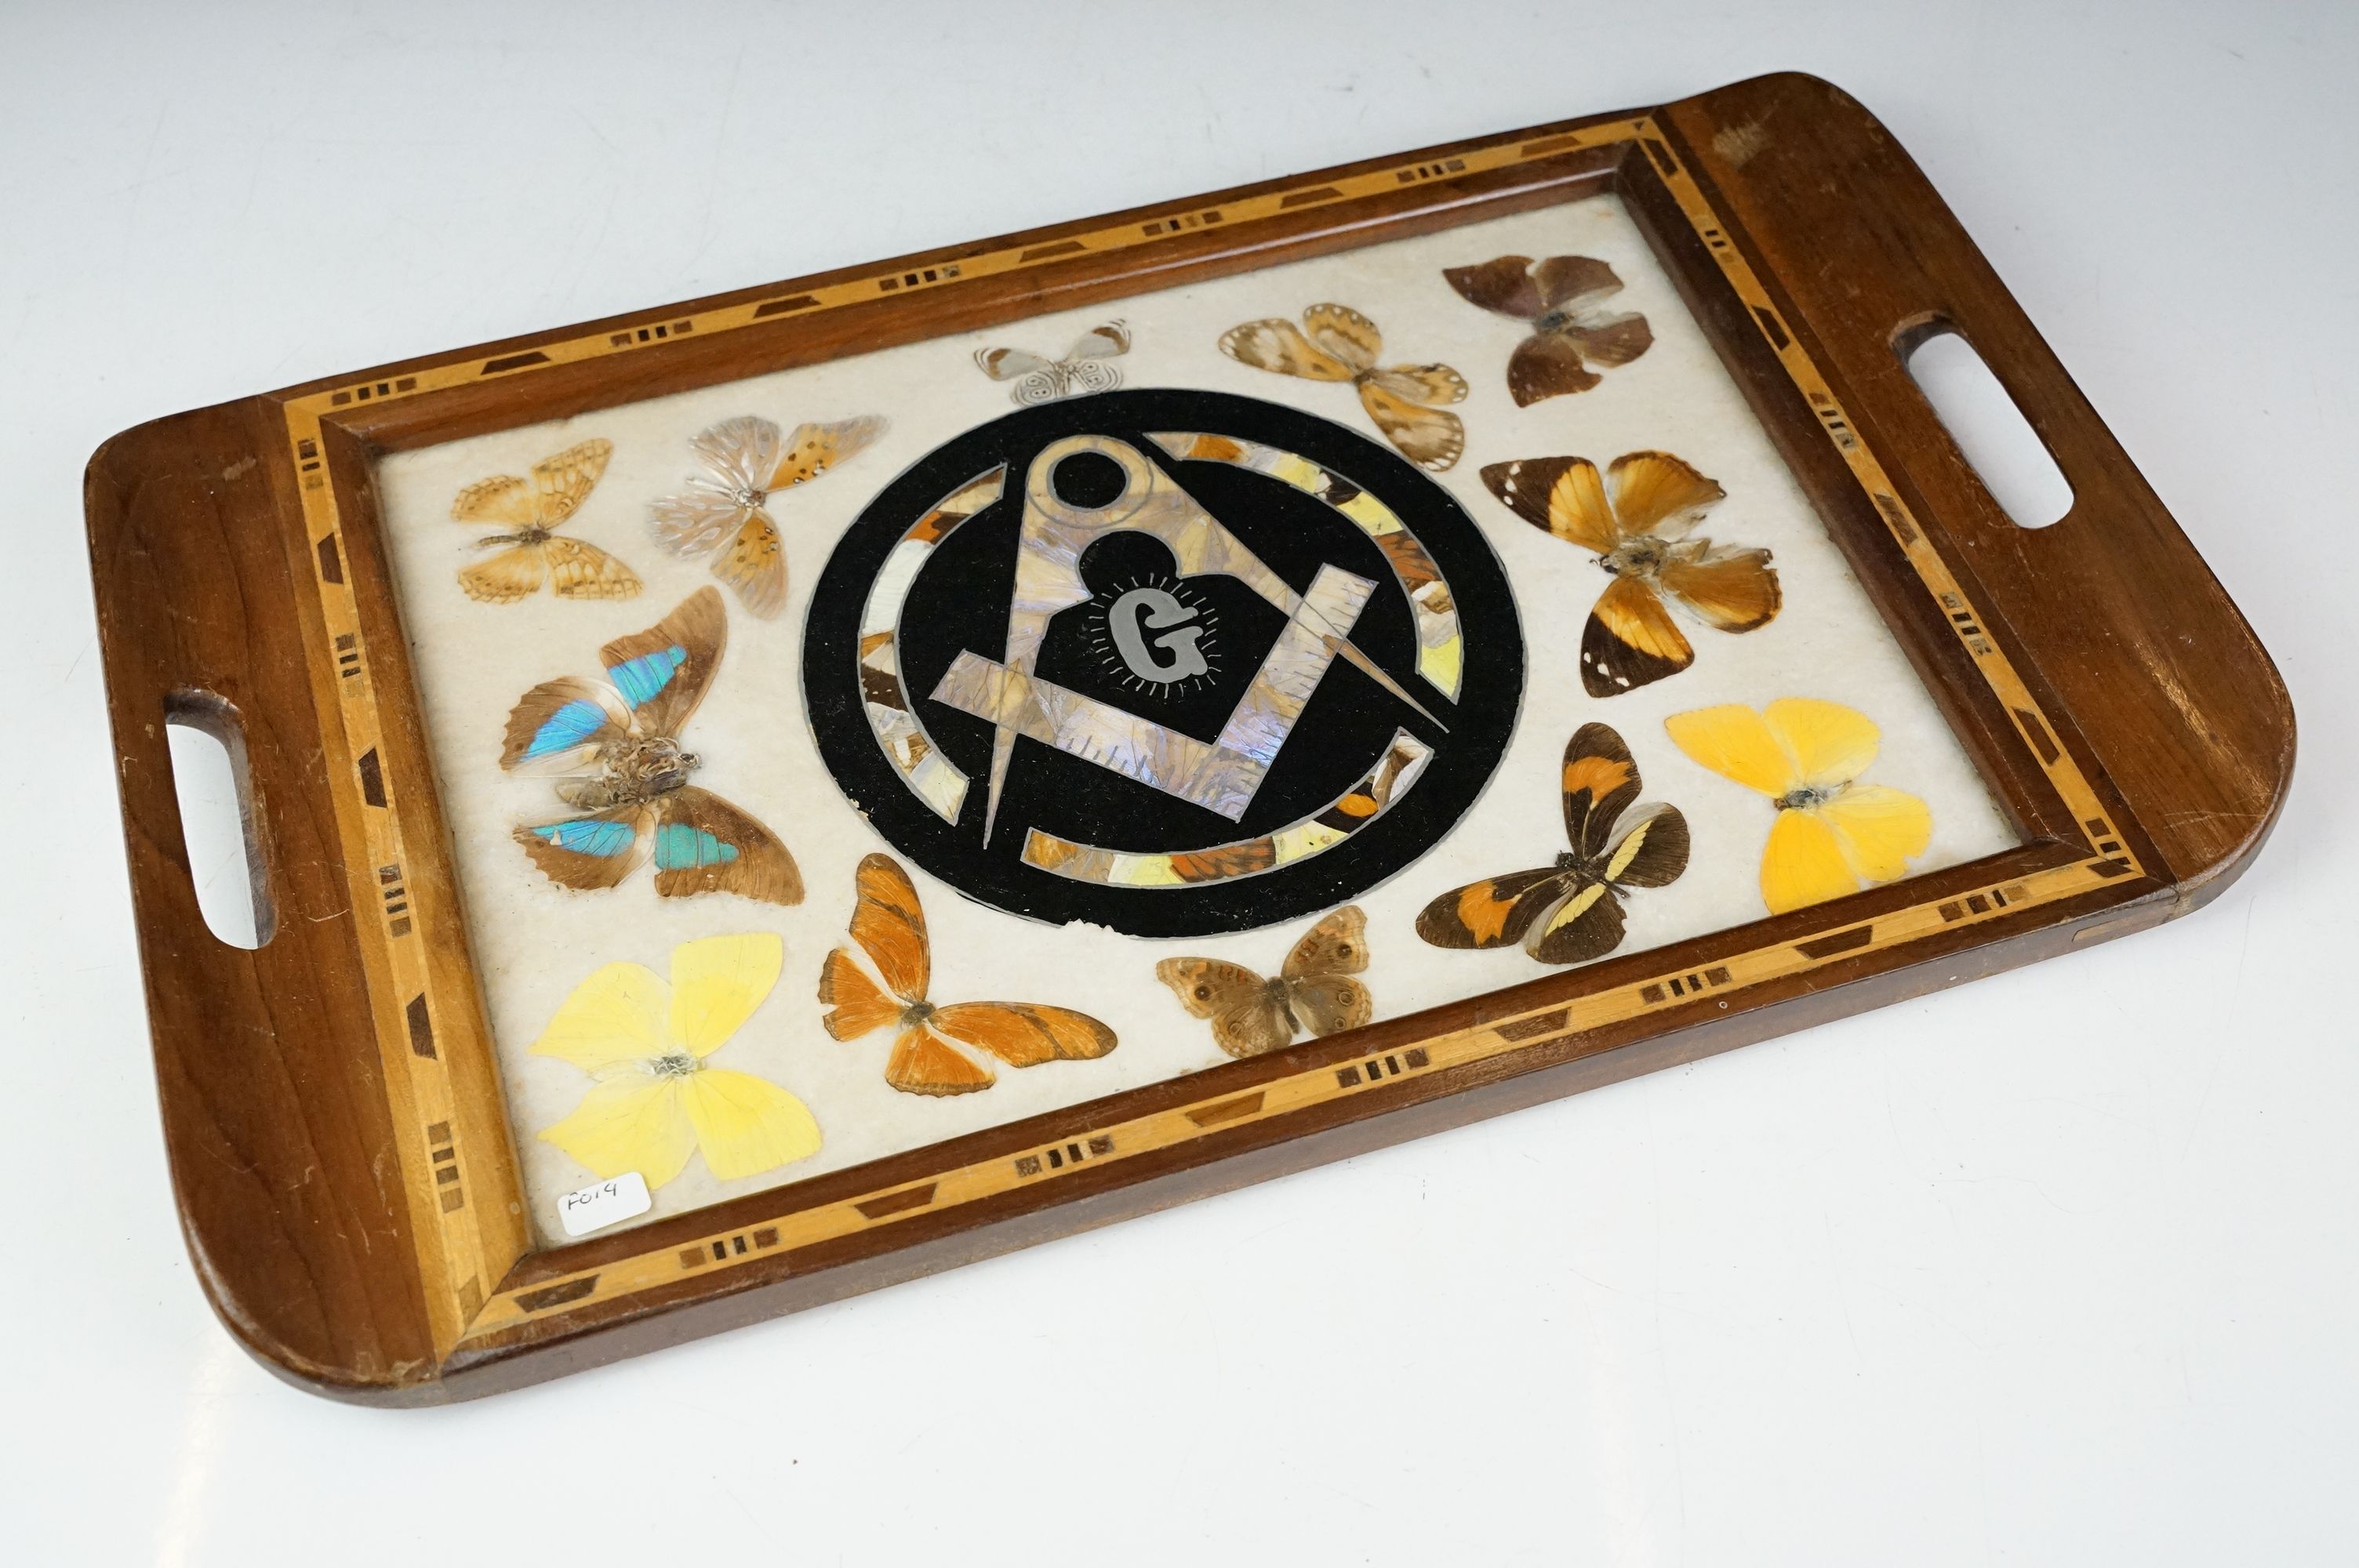 Early 20th century inlaid wooden tray with butterfly specimens and masonic butterfly wing emblem - Image 10 of 11